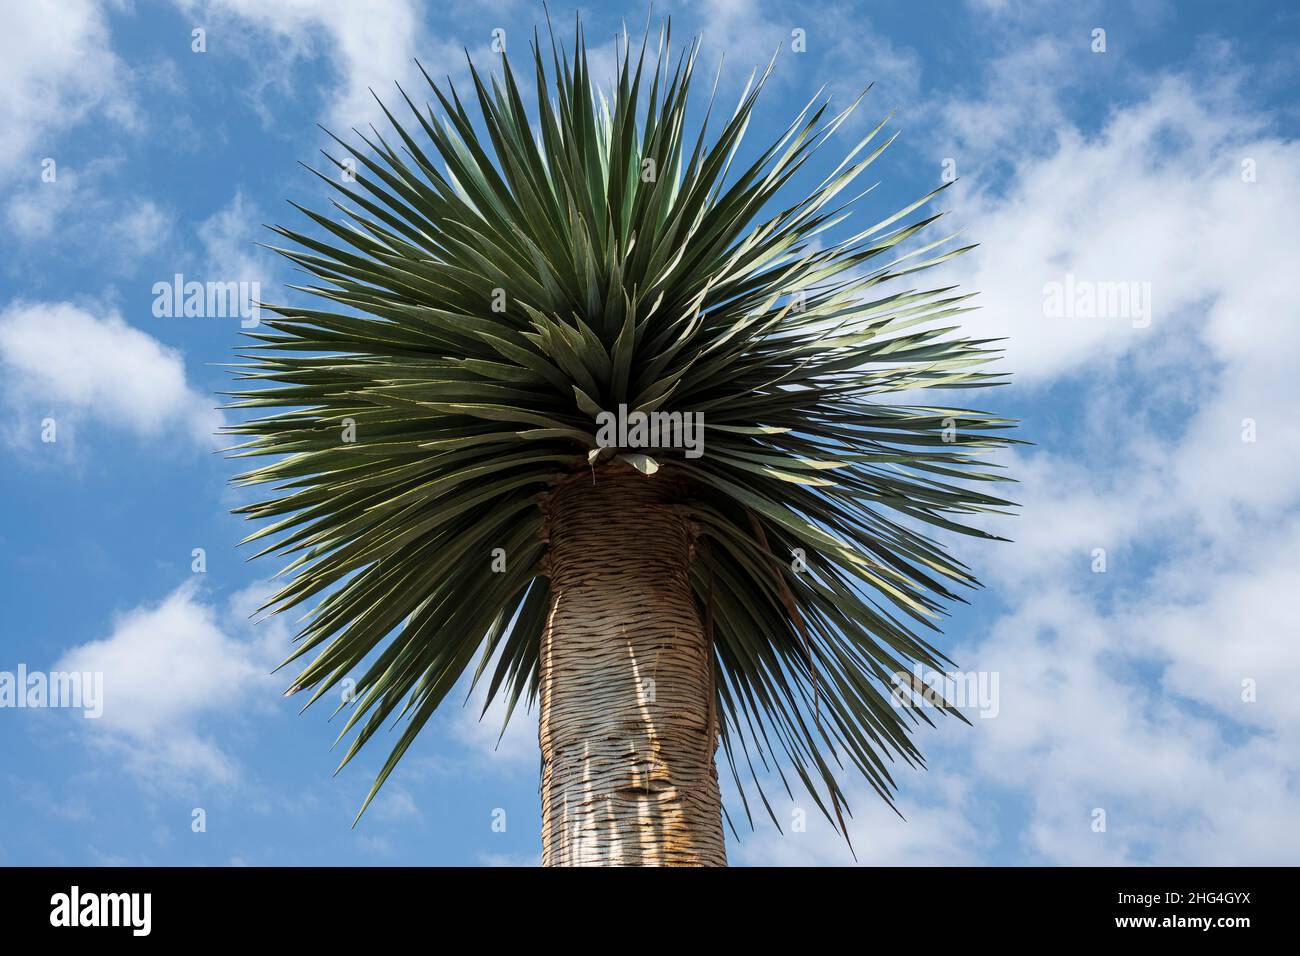 Dracaena draco, drago tree, leaves and trunk against the sky in San Miguel de Abona, Tenerife, Canary Islands, Spain Stock Photo